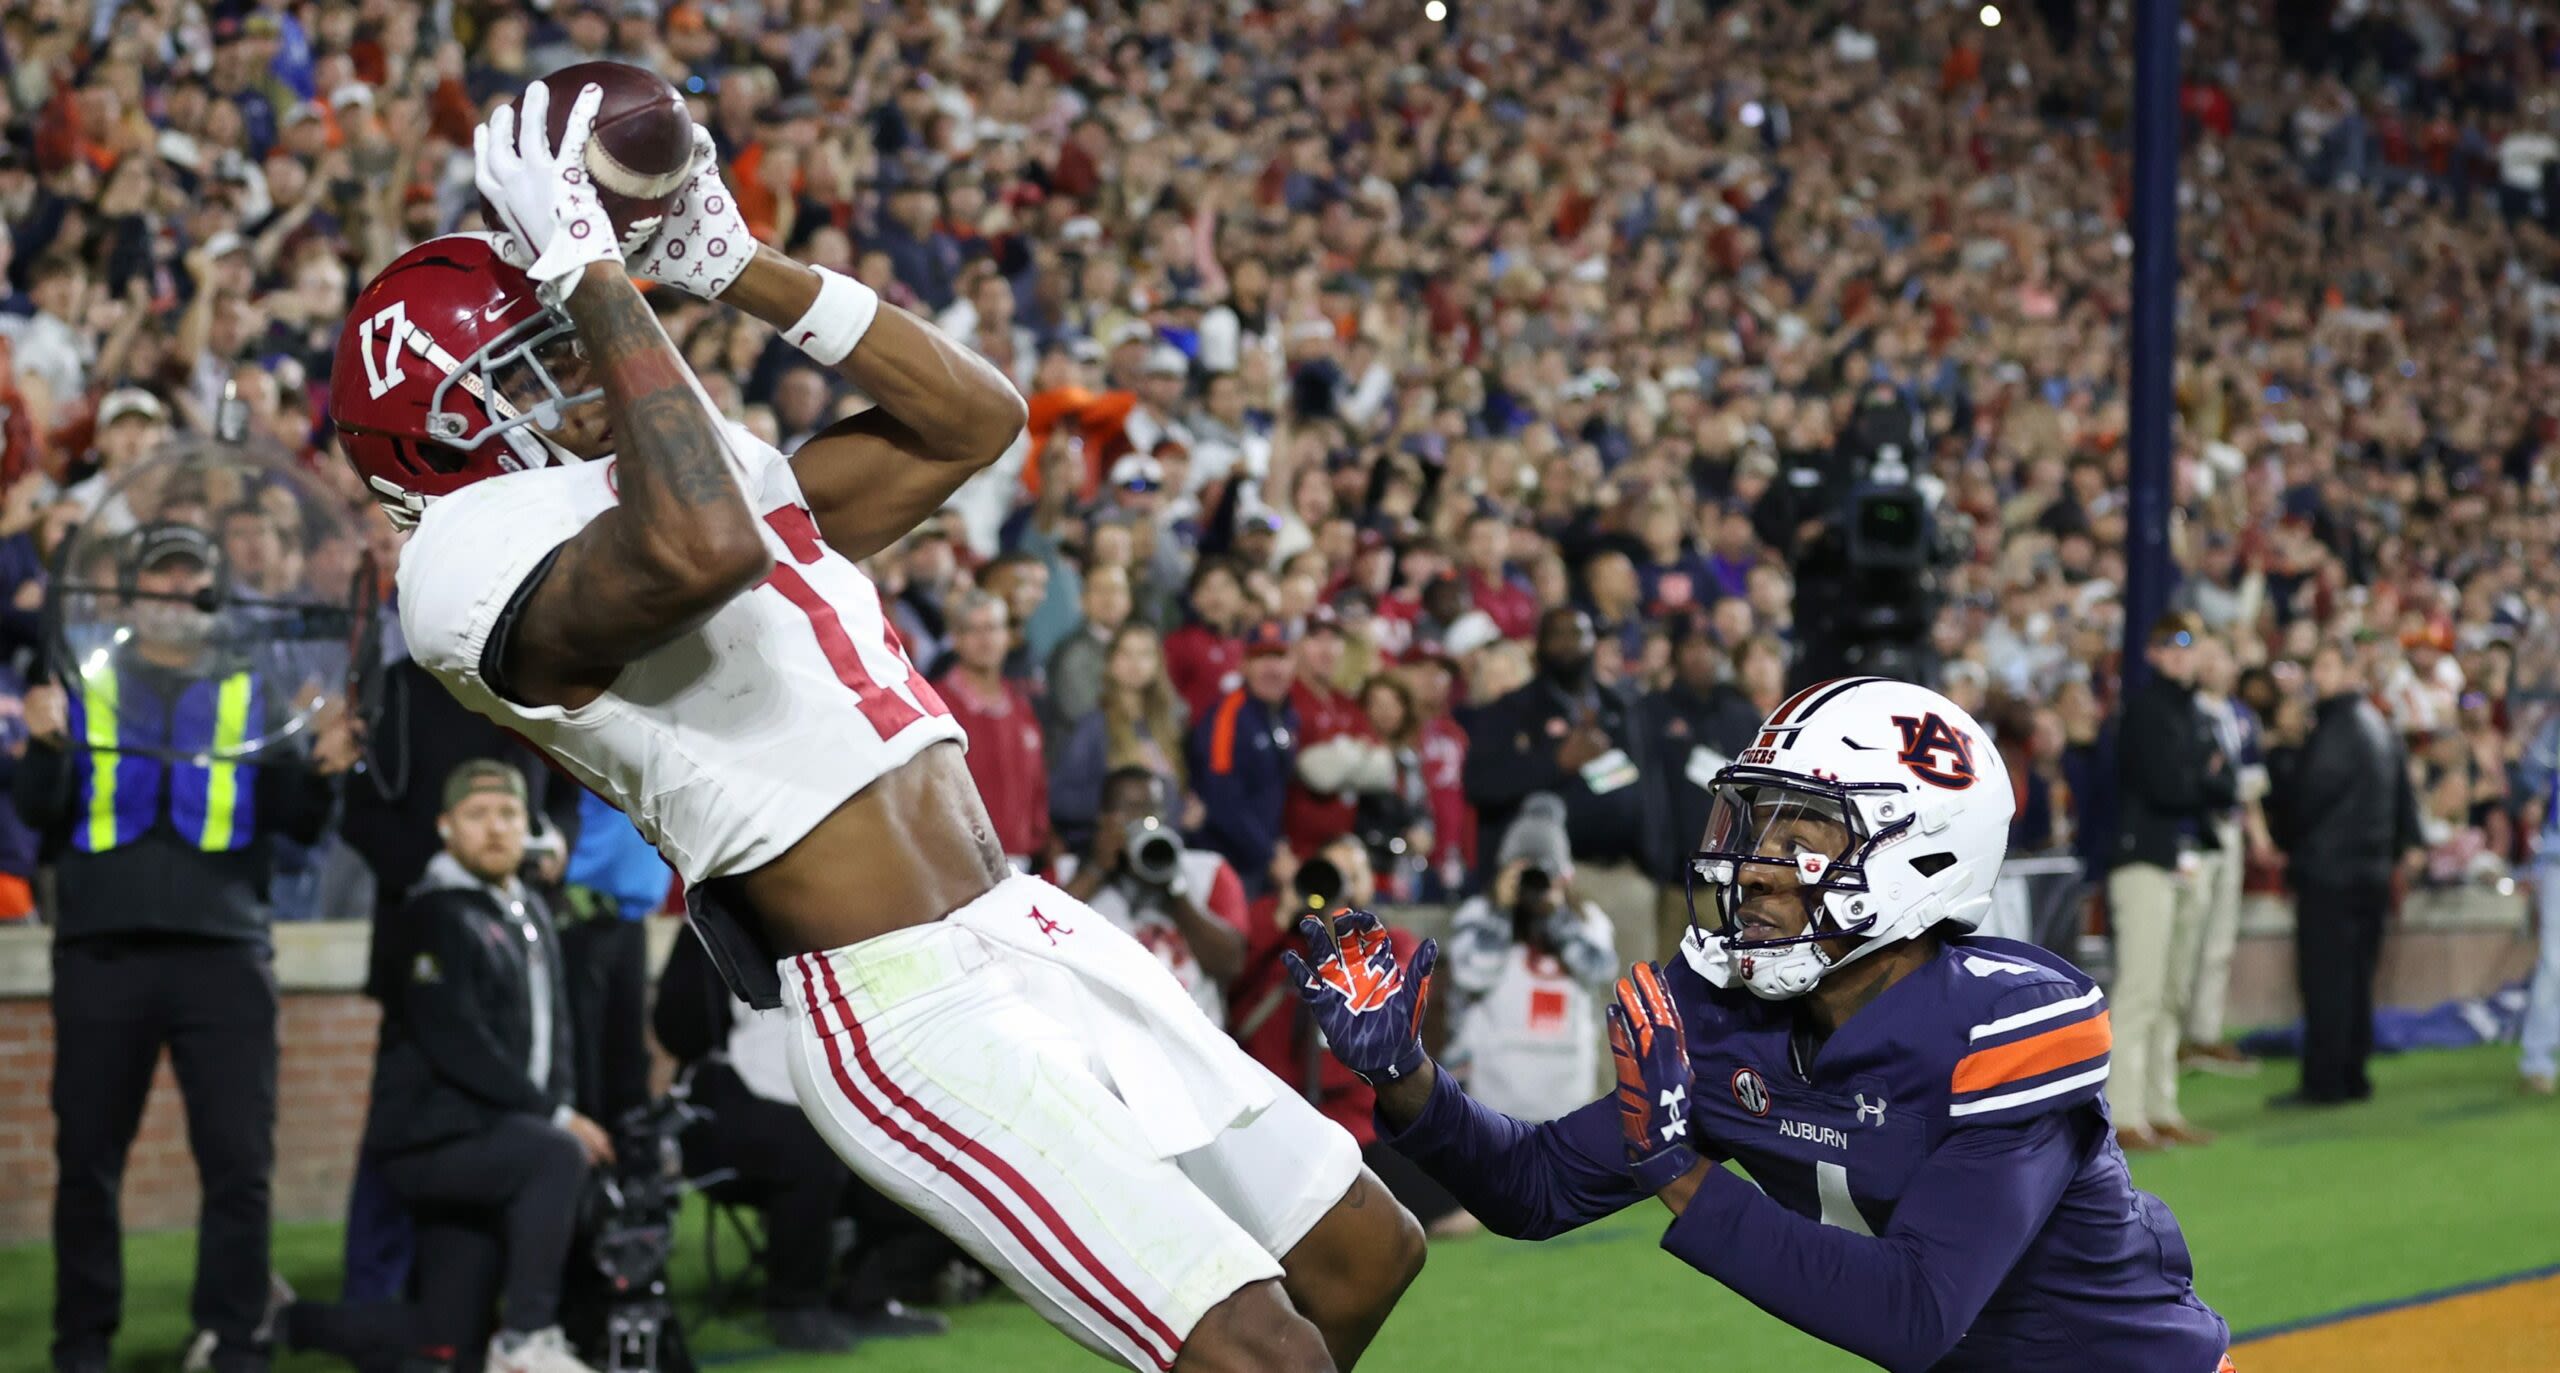 Does the Red River Rivalry dethrone the Iron Bowl as the best SEC rivalry game?